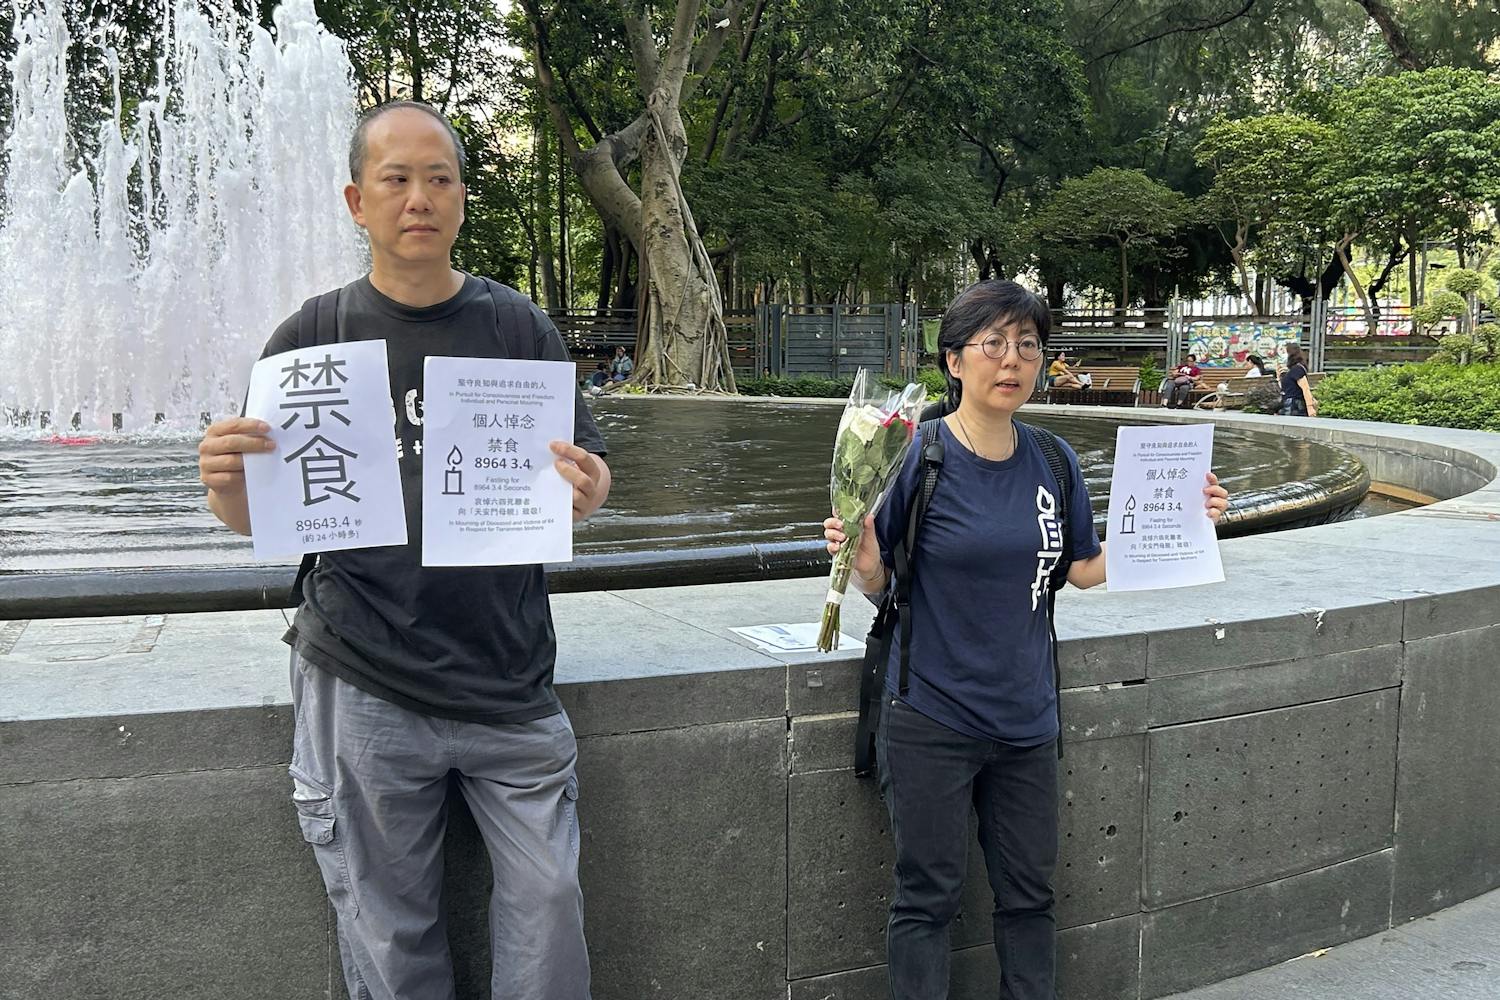 The activists were arrested by the Hong Kong police